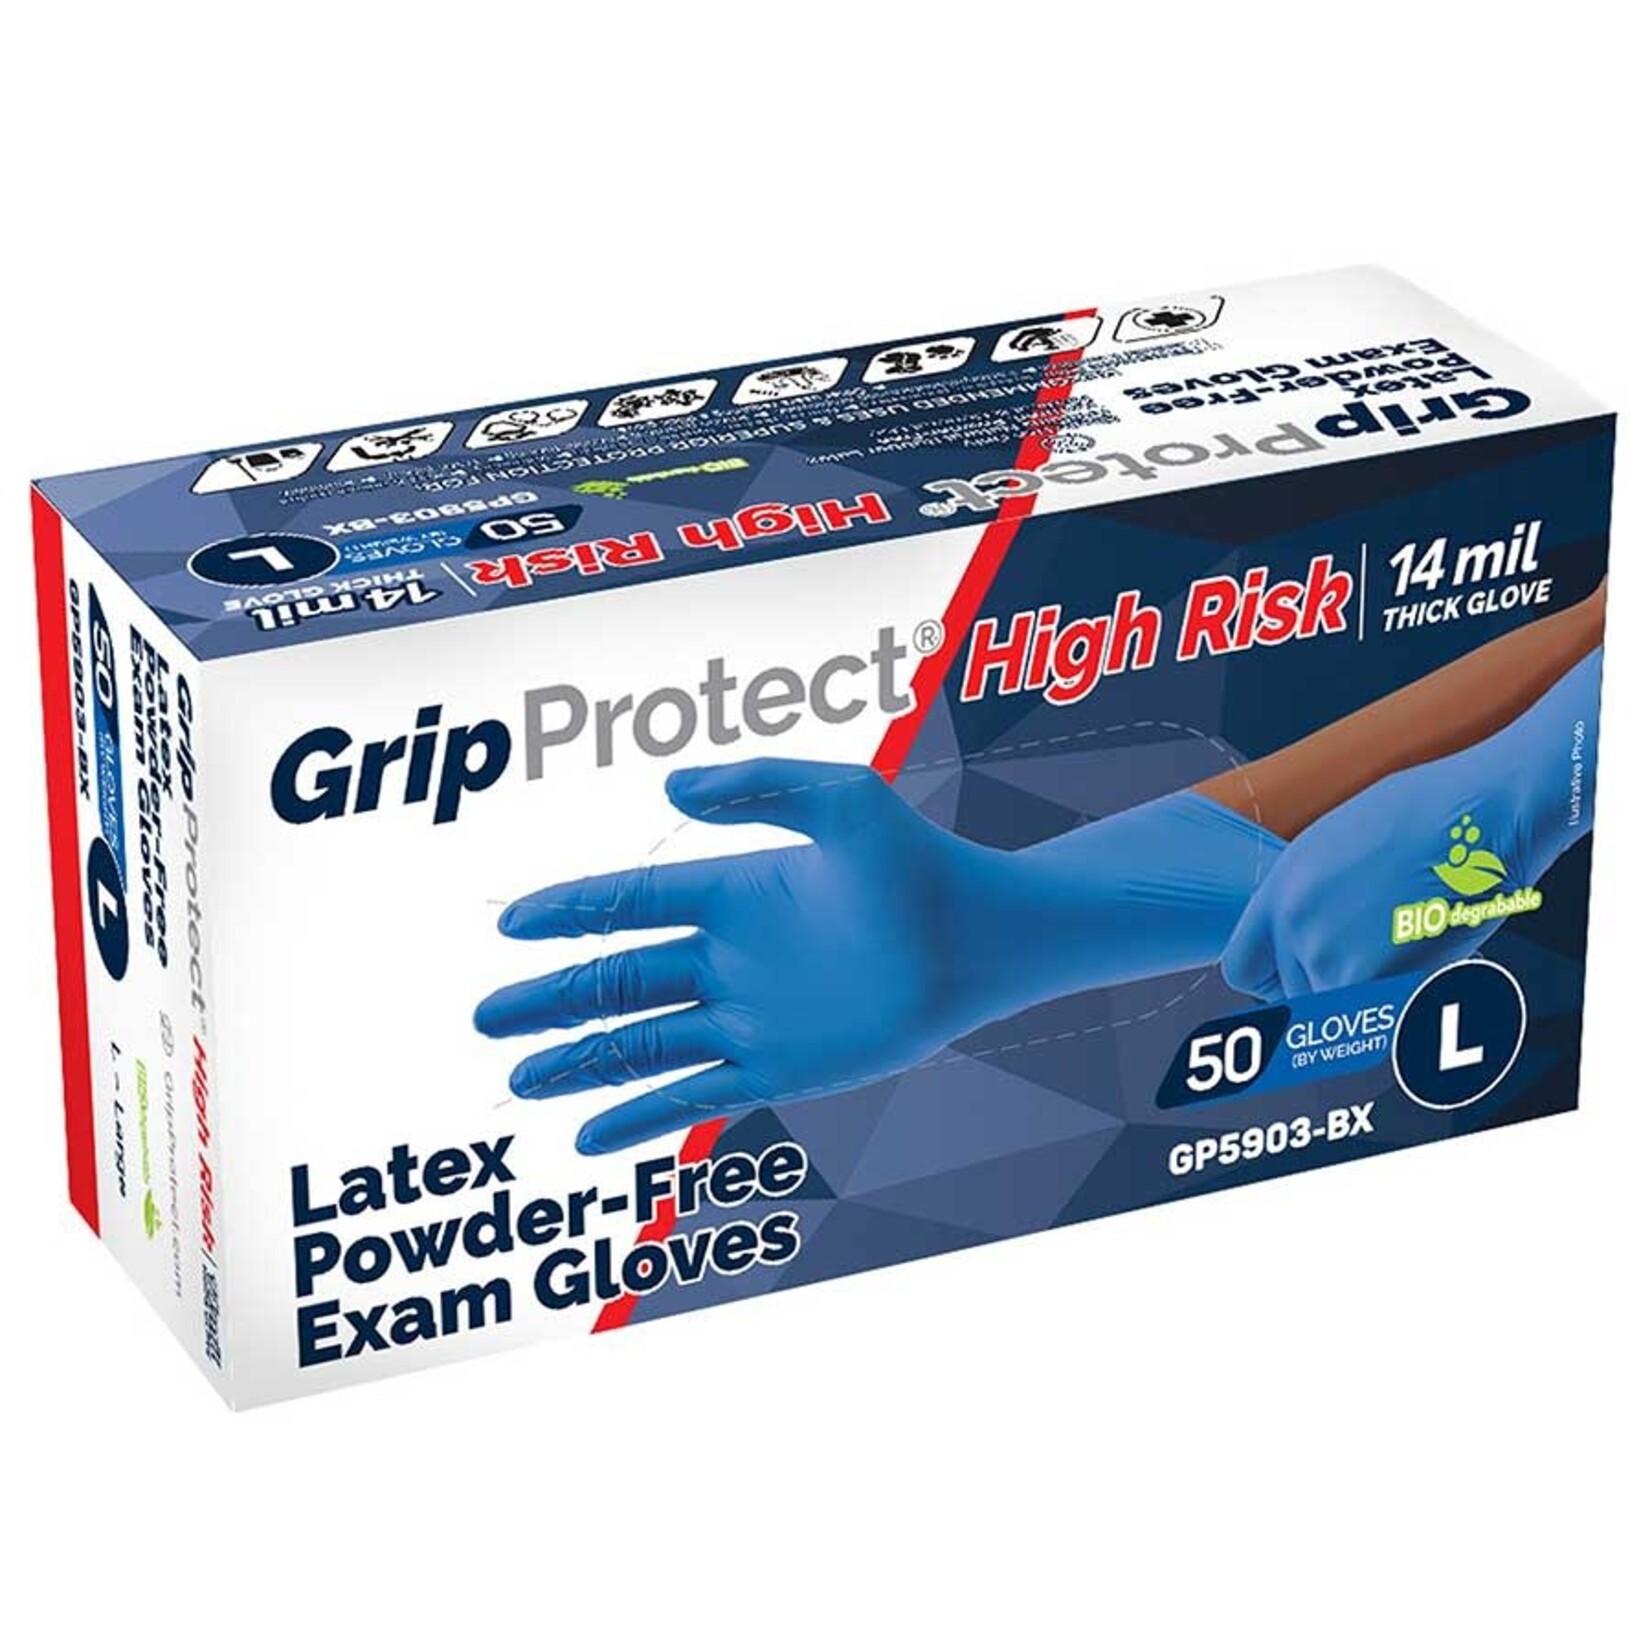 BMC Protect GripProtect High Risk 14 Mil Latex Powder-Free Exam Gloves, Blue, M (Case of 10 Boxes)